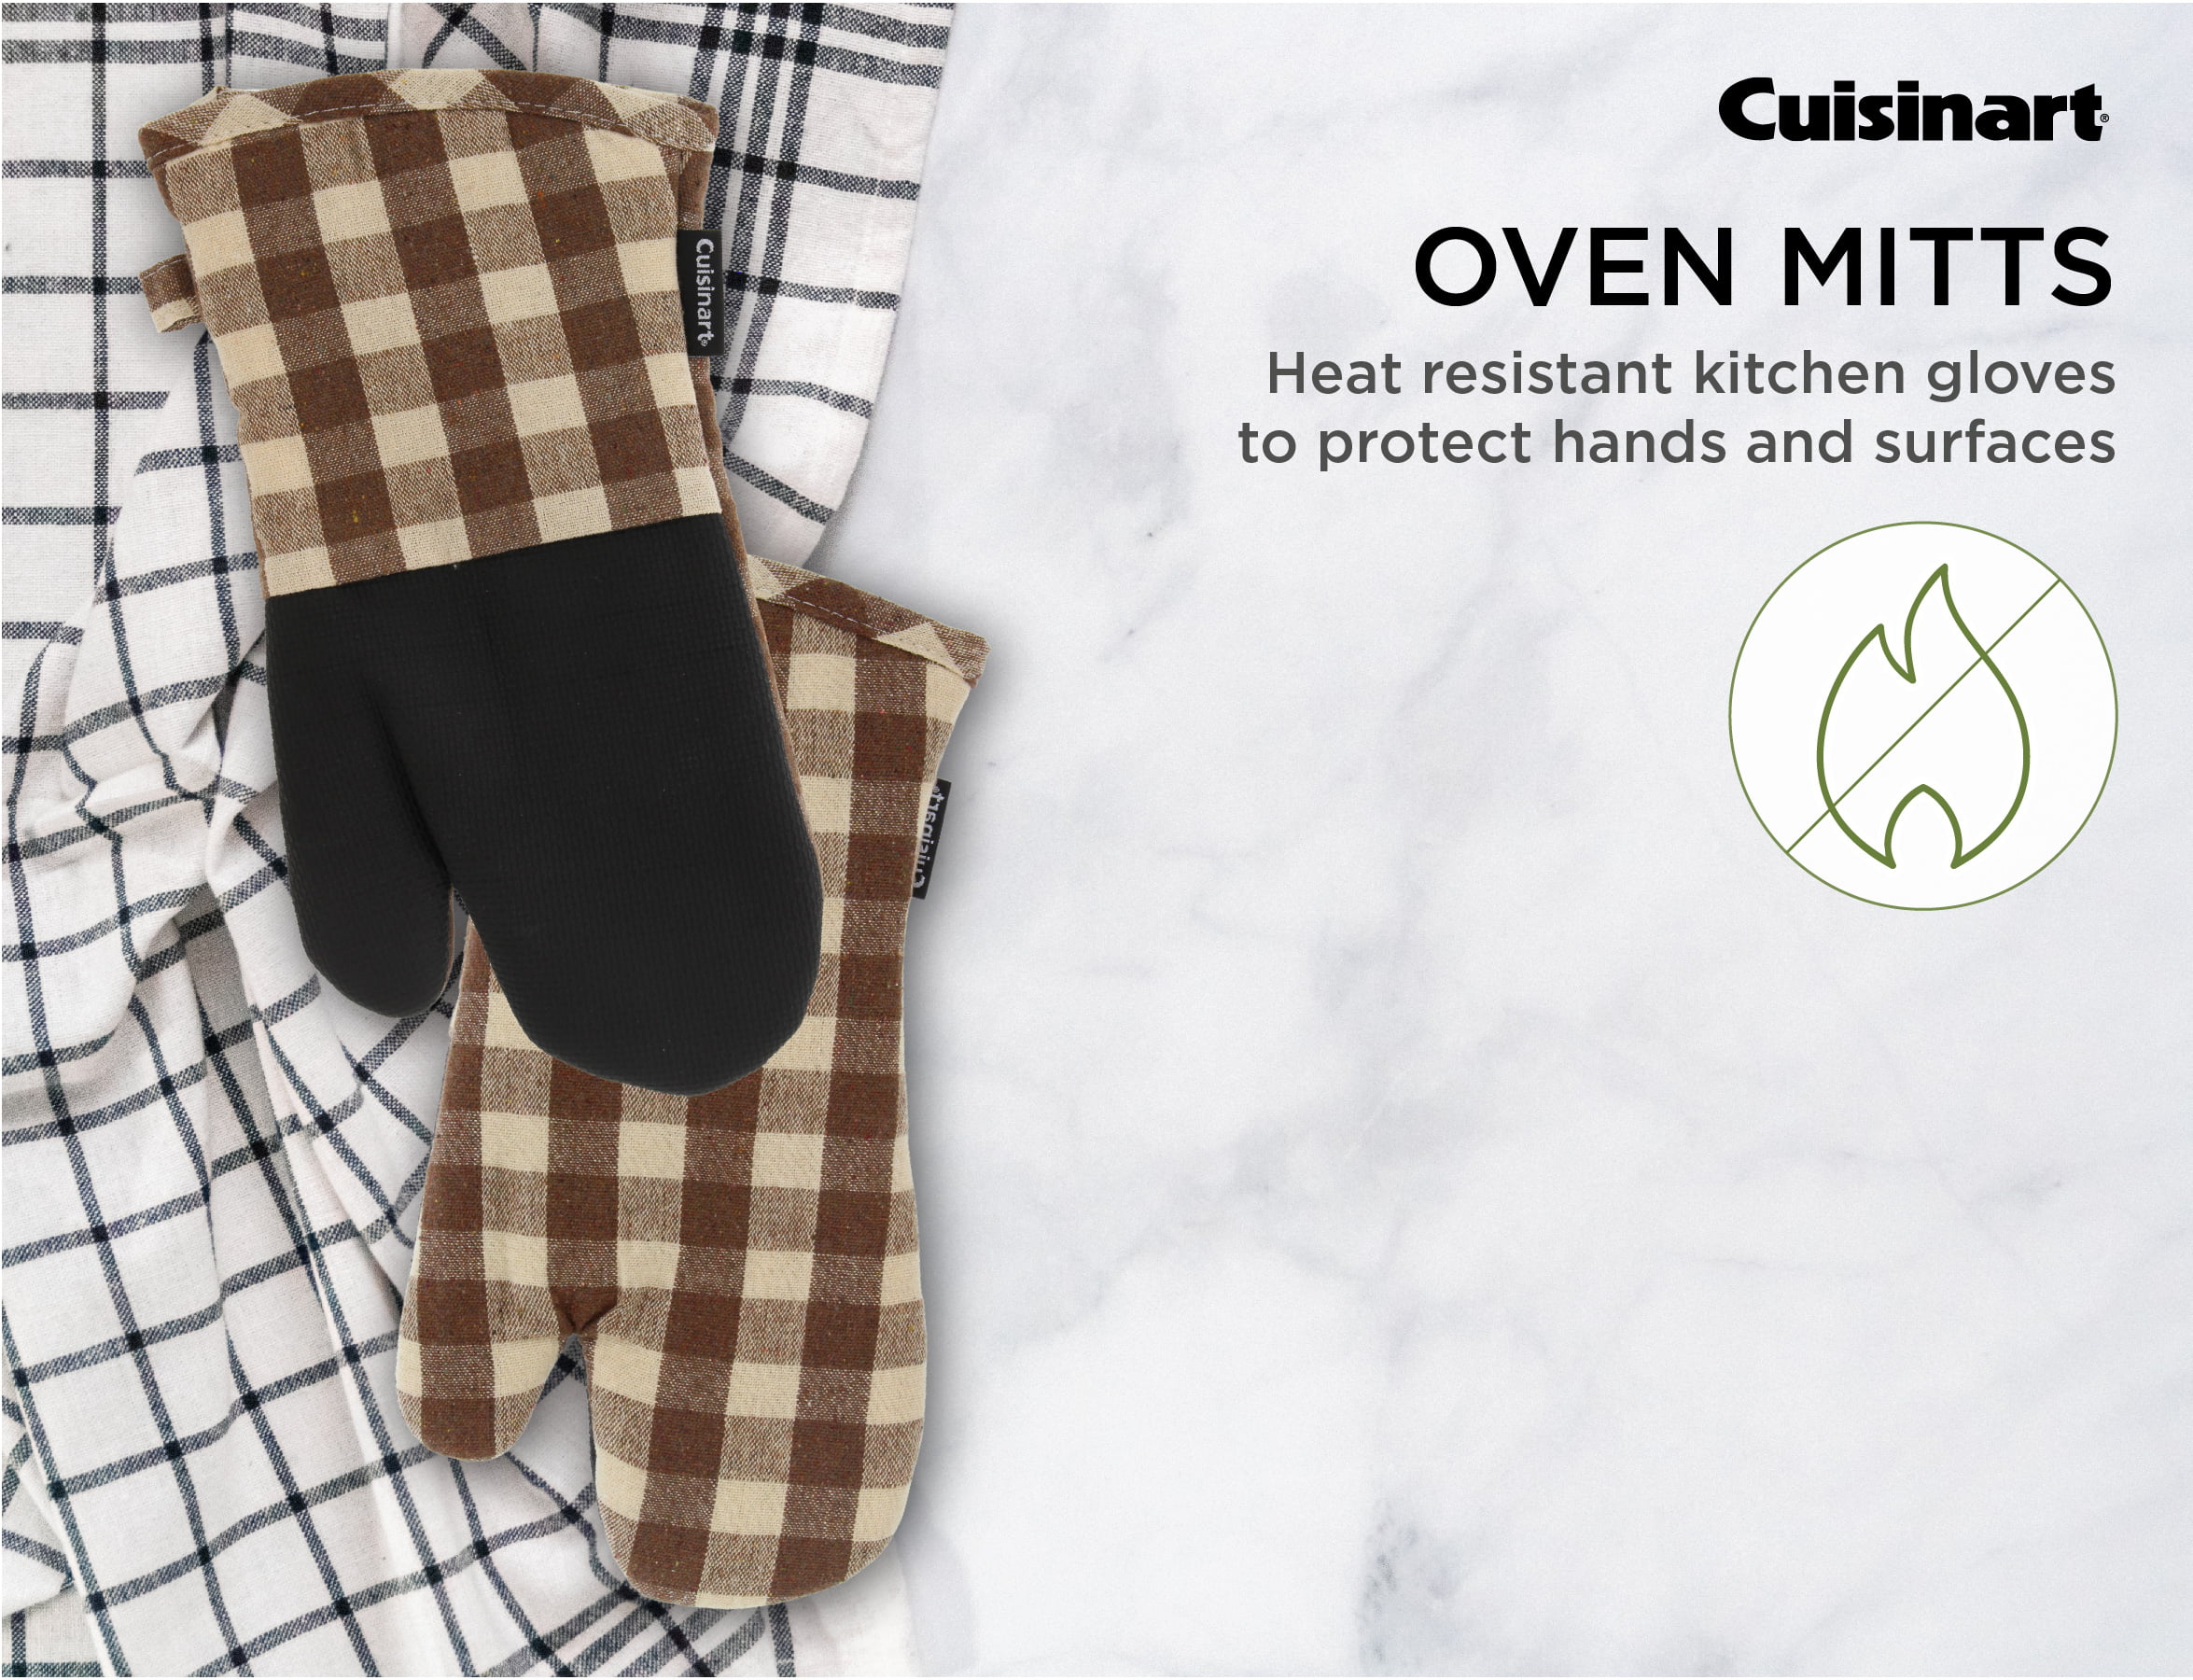 Cuisinart Buffalo Check Mini Oven Mitts, 2 Pack, Blue and Ivory Plaid  Design - Non-Slip Grip Oven Gloves with Insulated Pockets - 5.5 x 7.25  Inches 